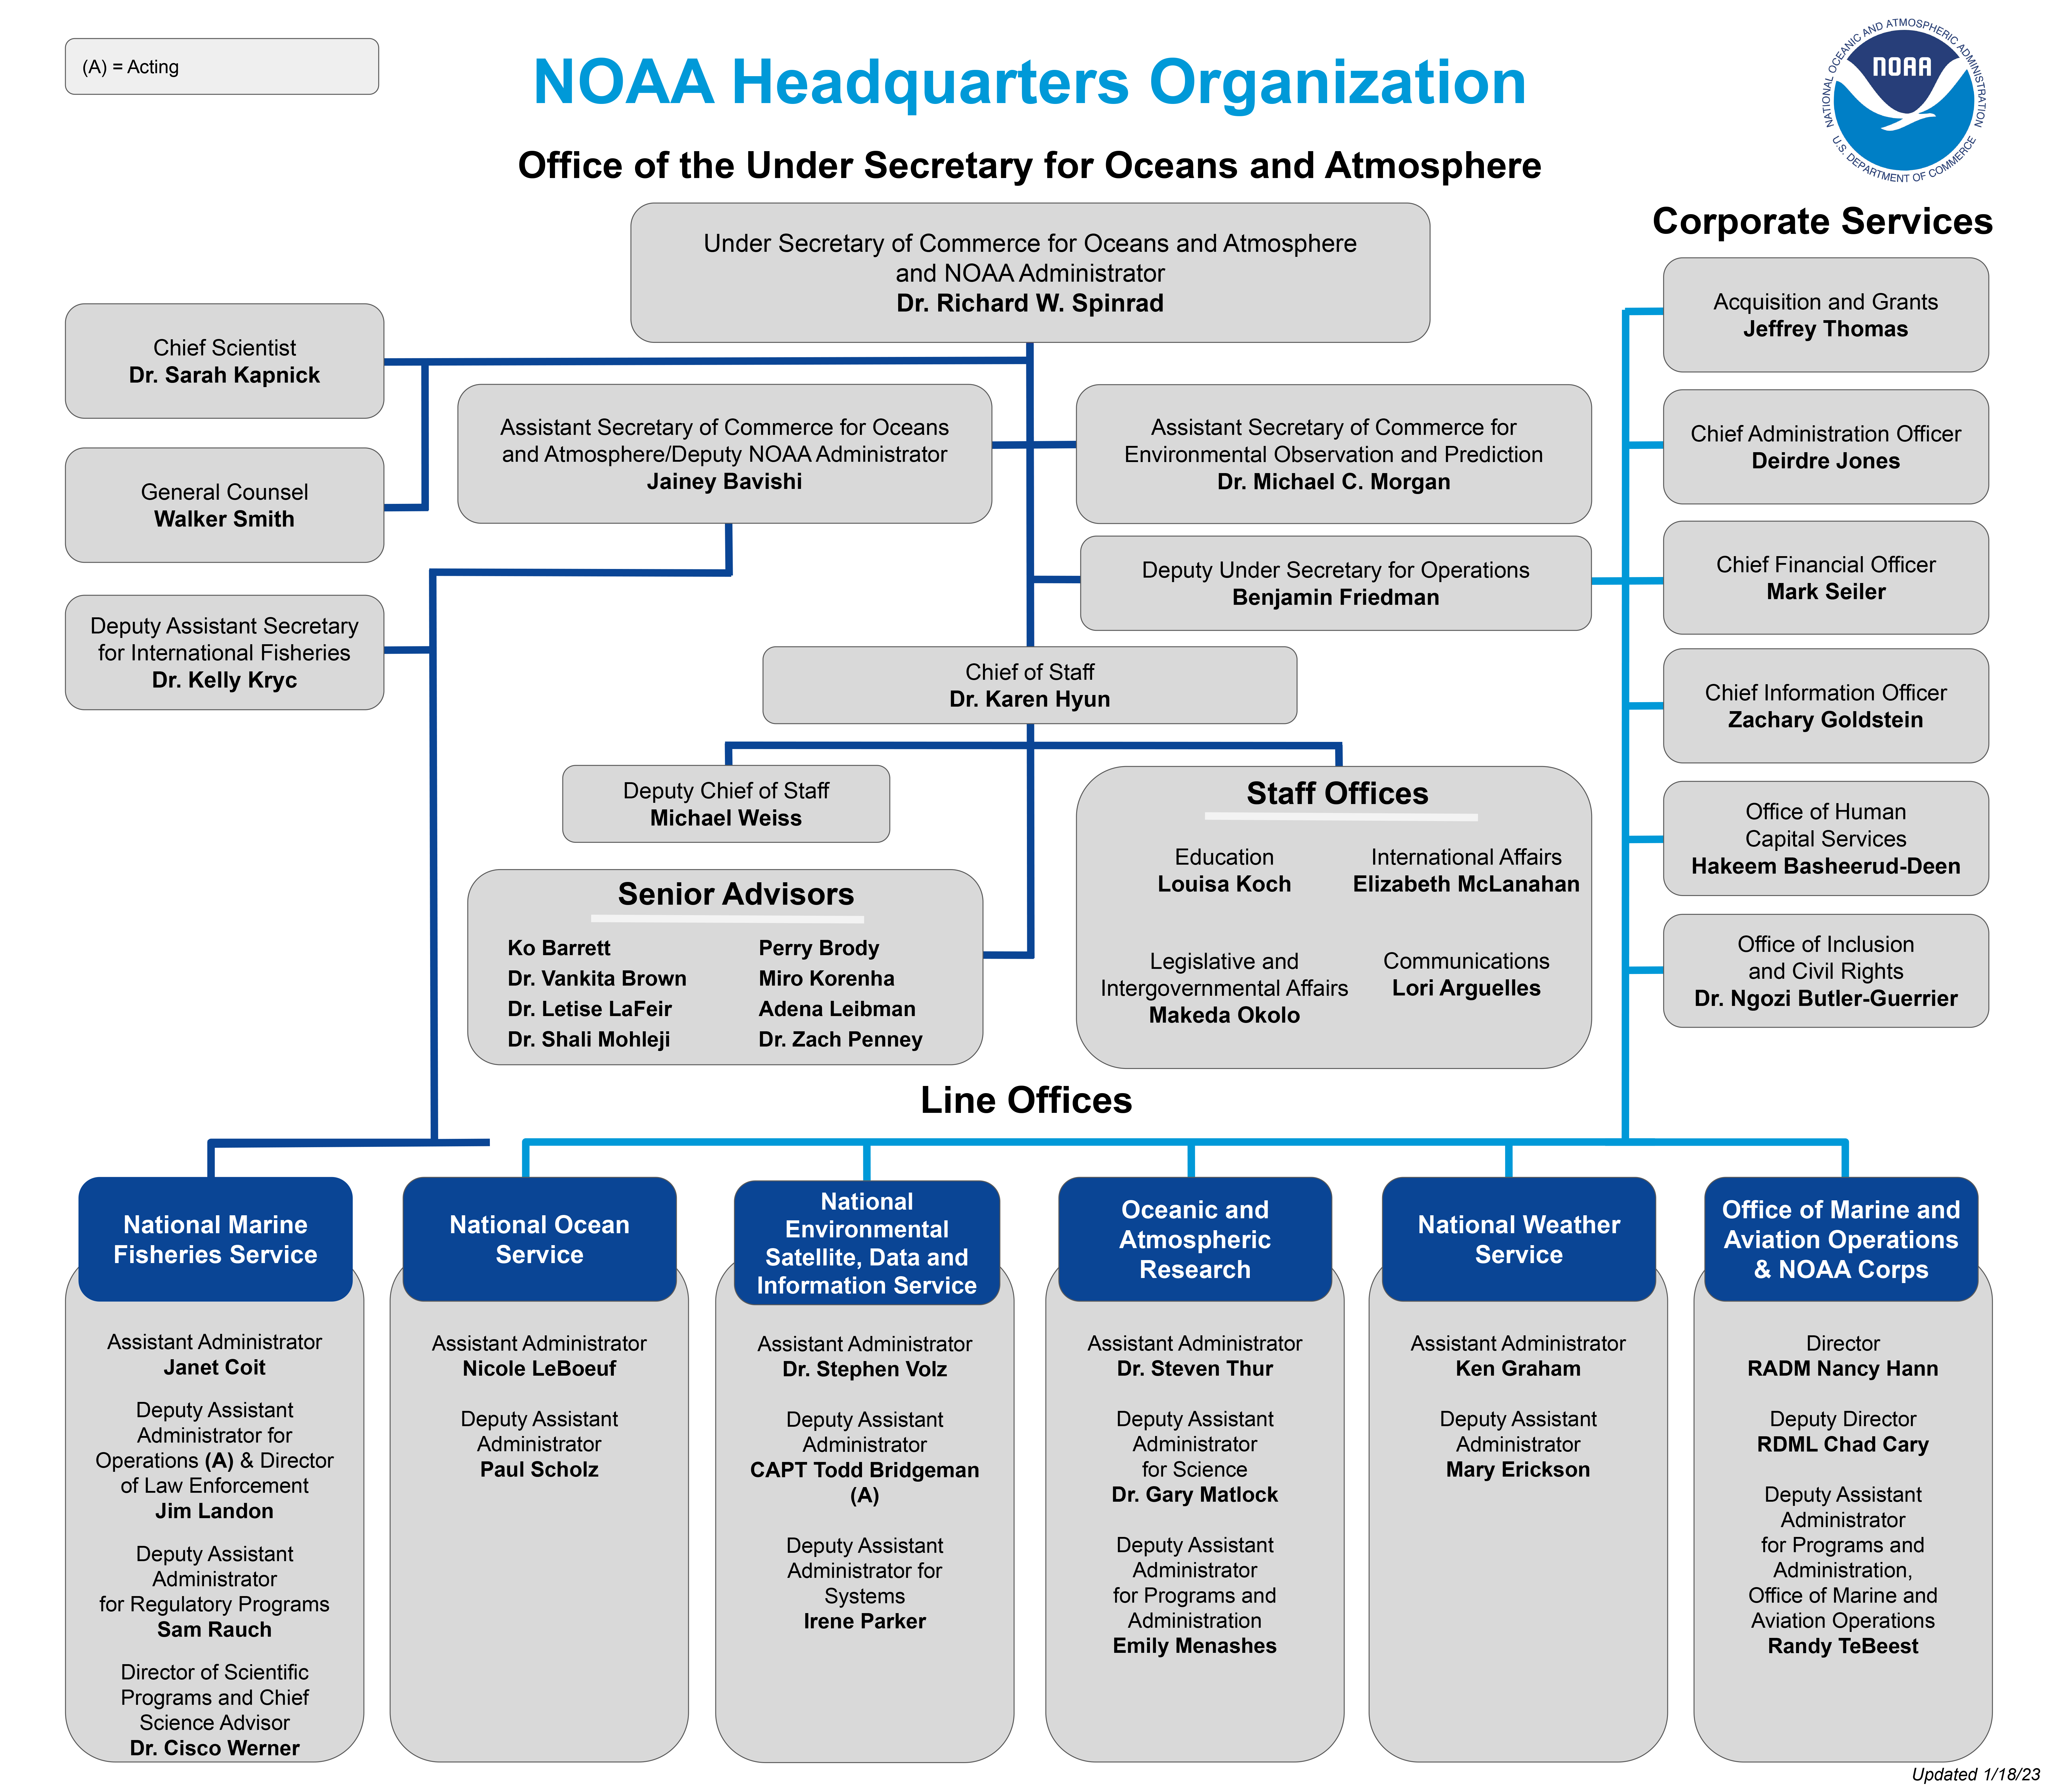 The organizational chart for NOAA headquarters leadership and senior staff as of January 18, 2023. 